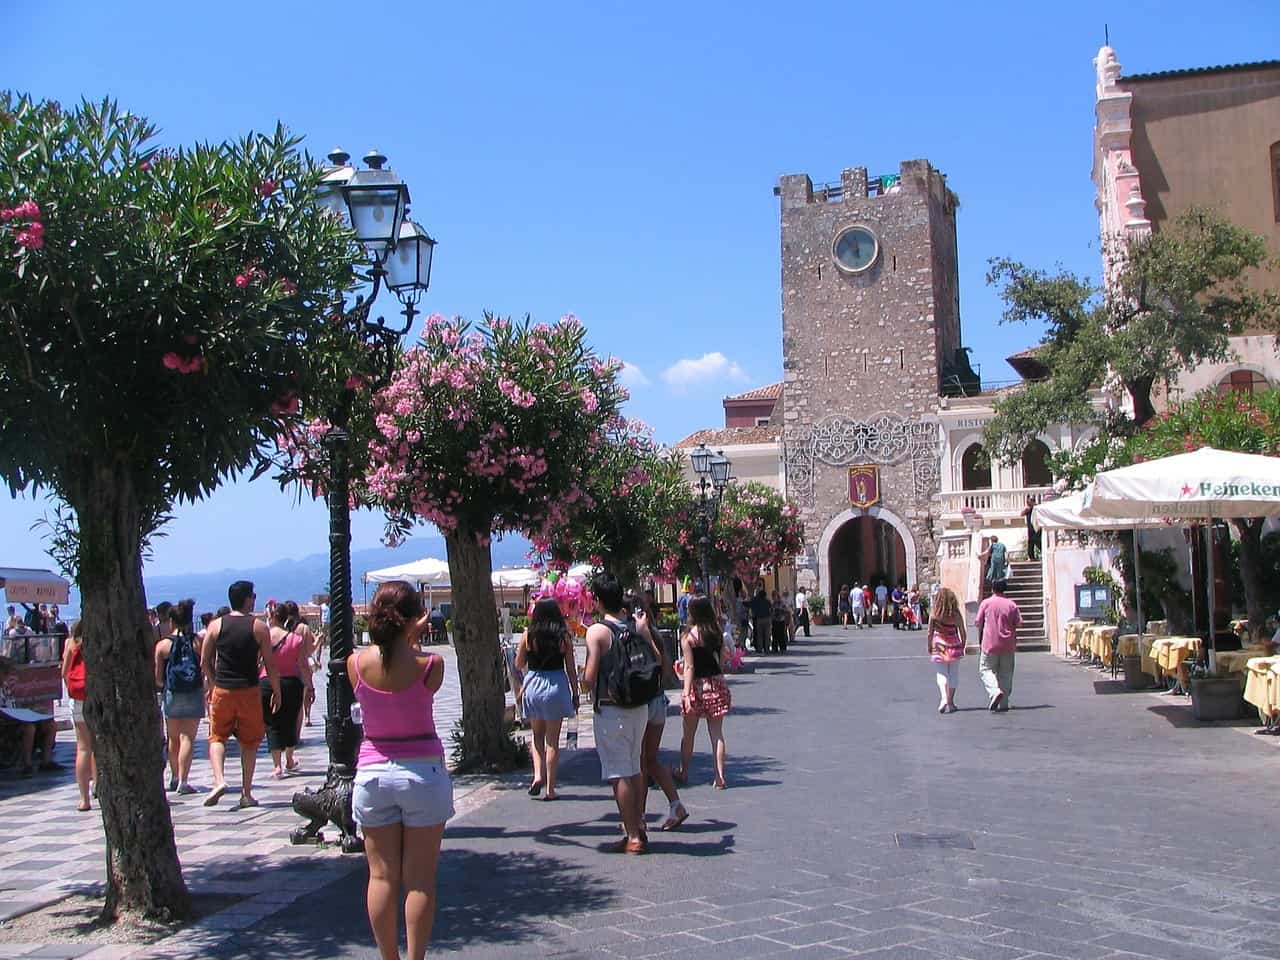 Let's take you to the Amazing Italian city of Taormina on Sicily